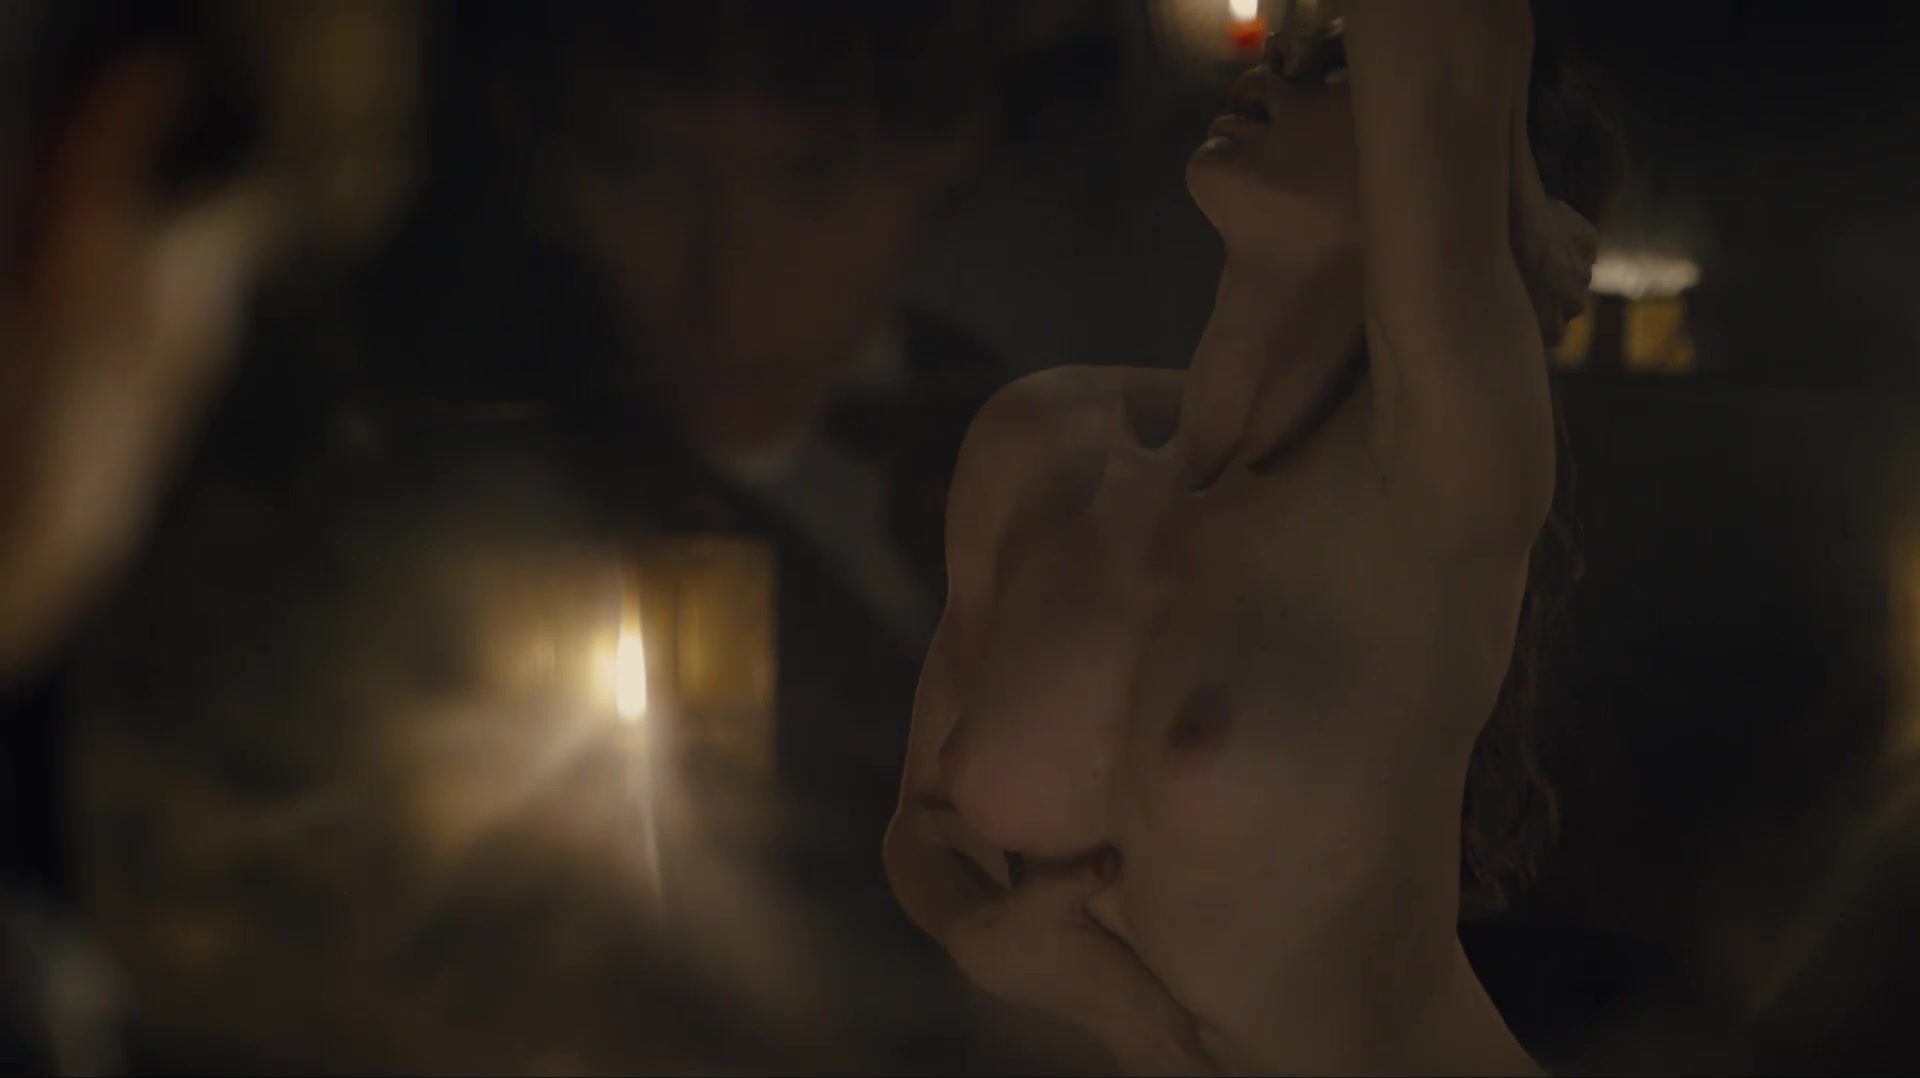 Stretching Director focuses on Sonya Cullingford's nice boobies showing them in The Danish Girl Gay Medical